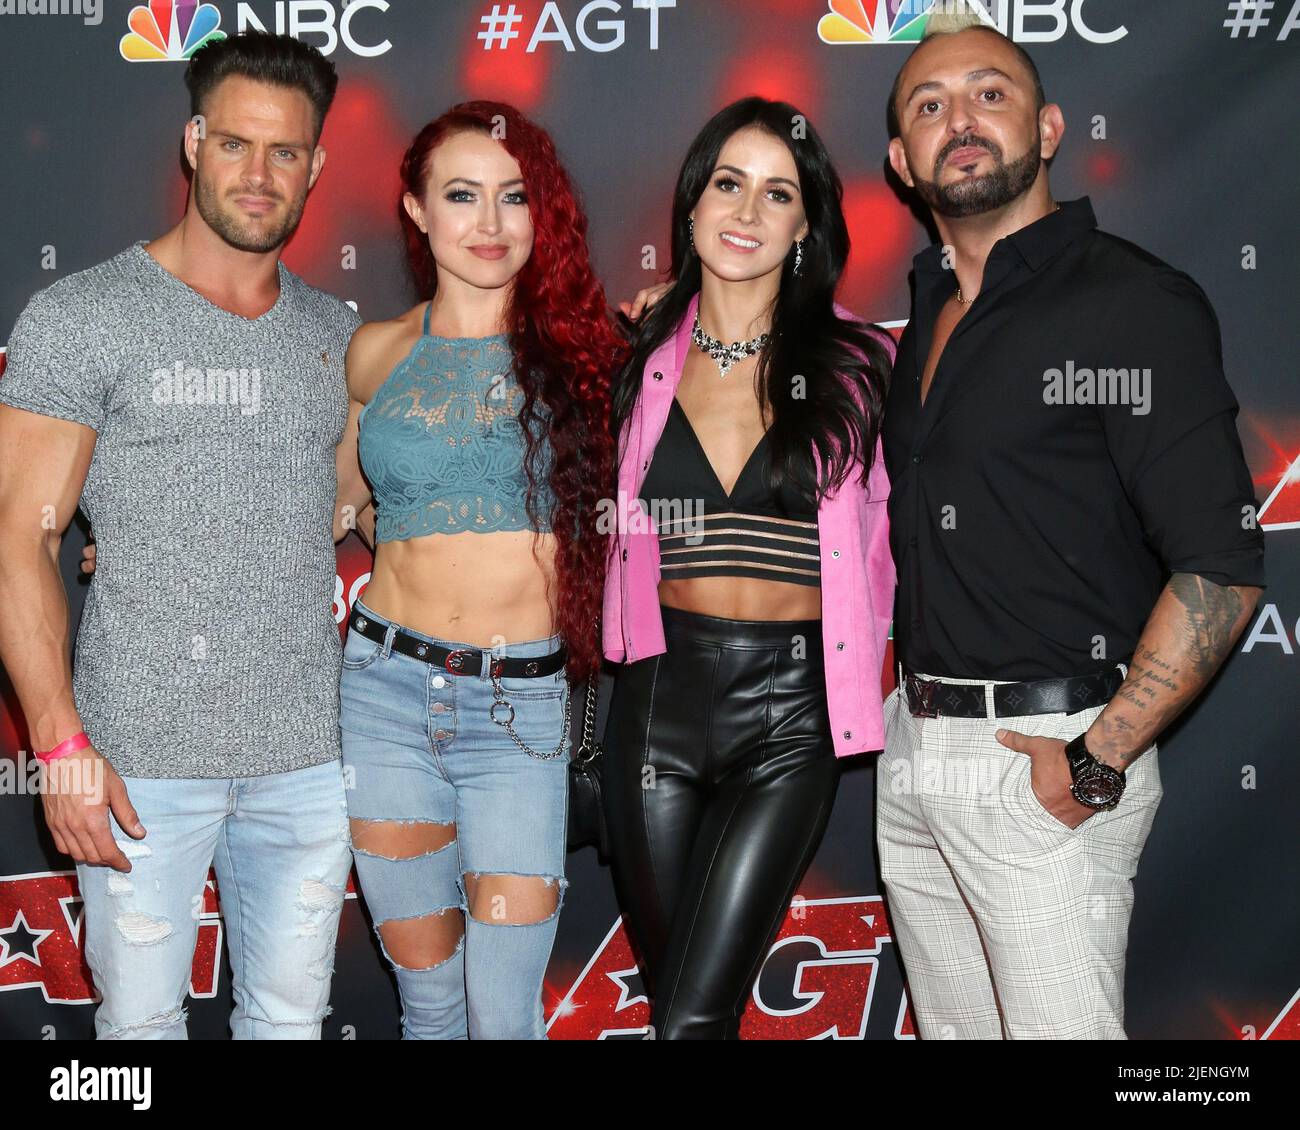 America's Got Talent Live Show Red Carpet at the Dolby Theater on September 7, 2021 in Los Angeles, CA Featuring: Tyce Nielsen, Mary Wolfe-Nielsen, Anna Silva, and Alfredo Silva Where: Los Angeles, California, United States When: 08 Sep 2021 Credit: Nicky Nelson/WENN.com Stock Photo